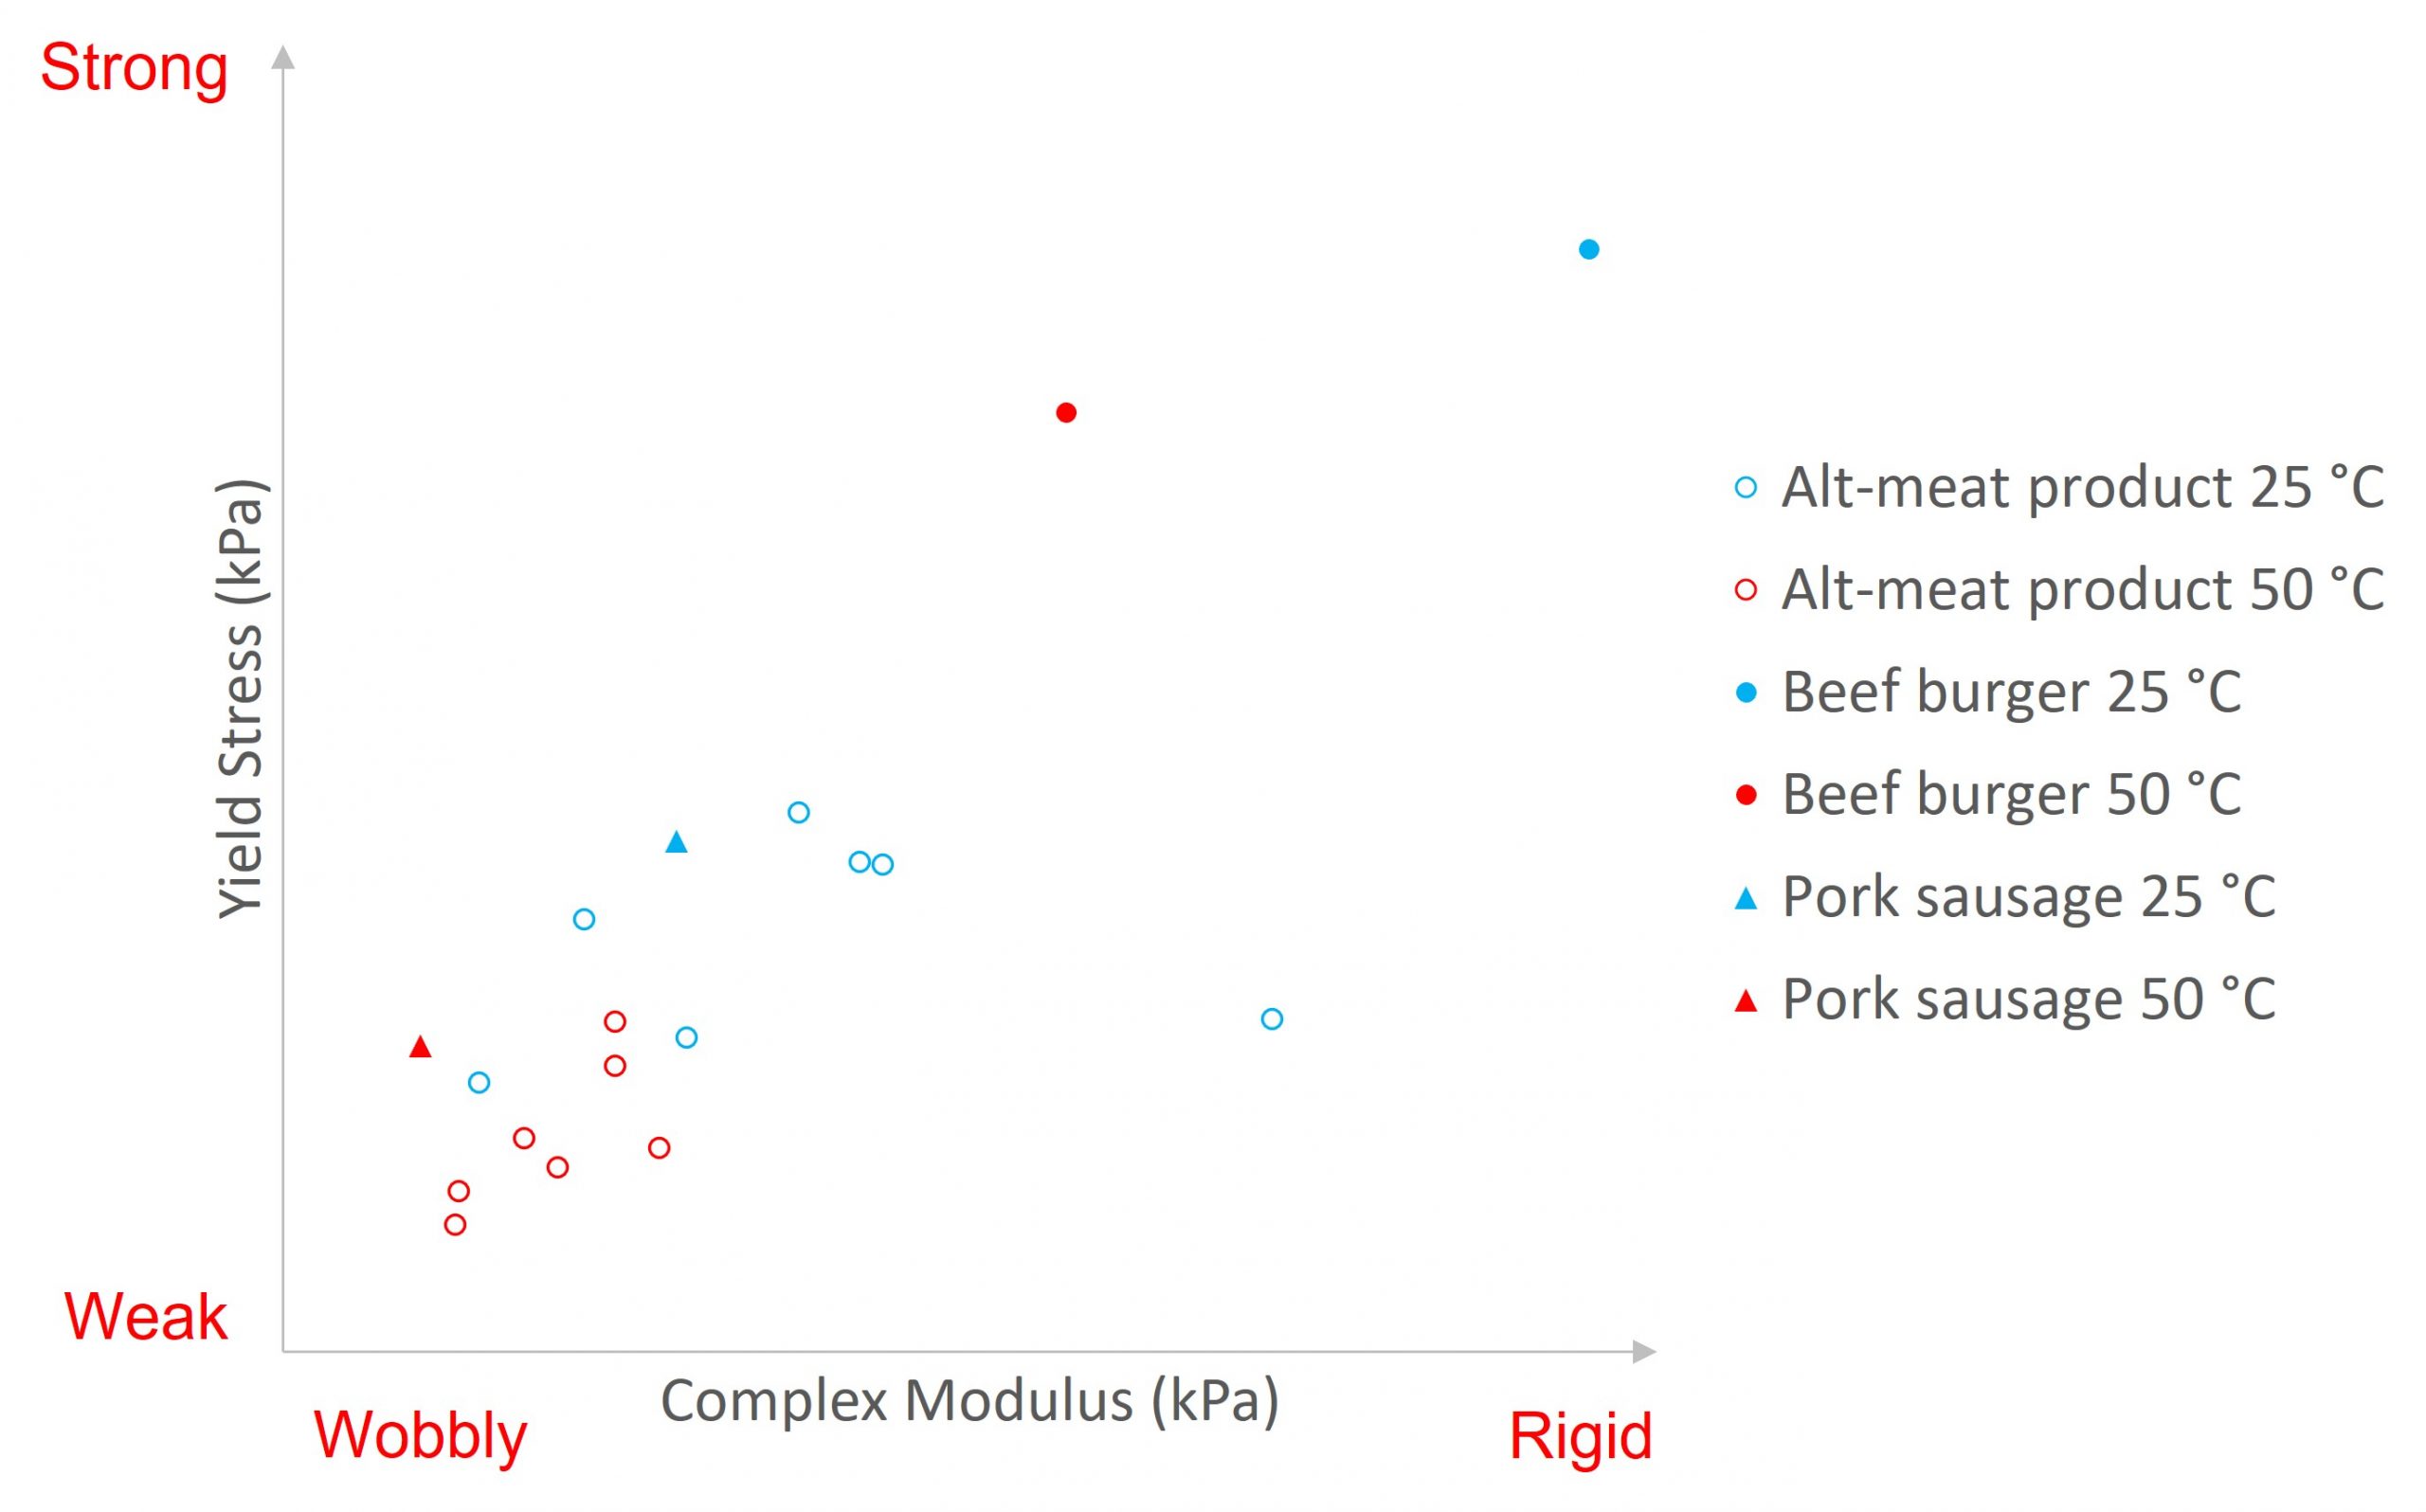 Yield stress plotted against the complex modulus to provide a texture map for plant-based meats